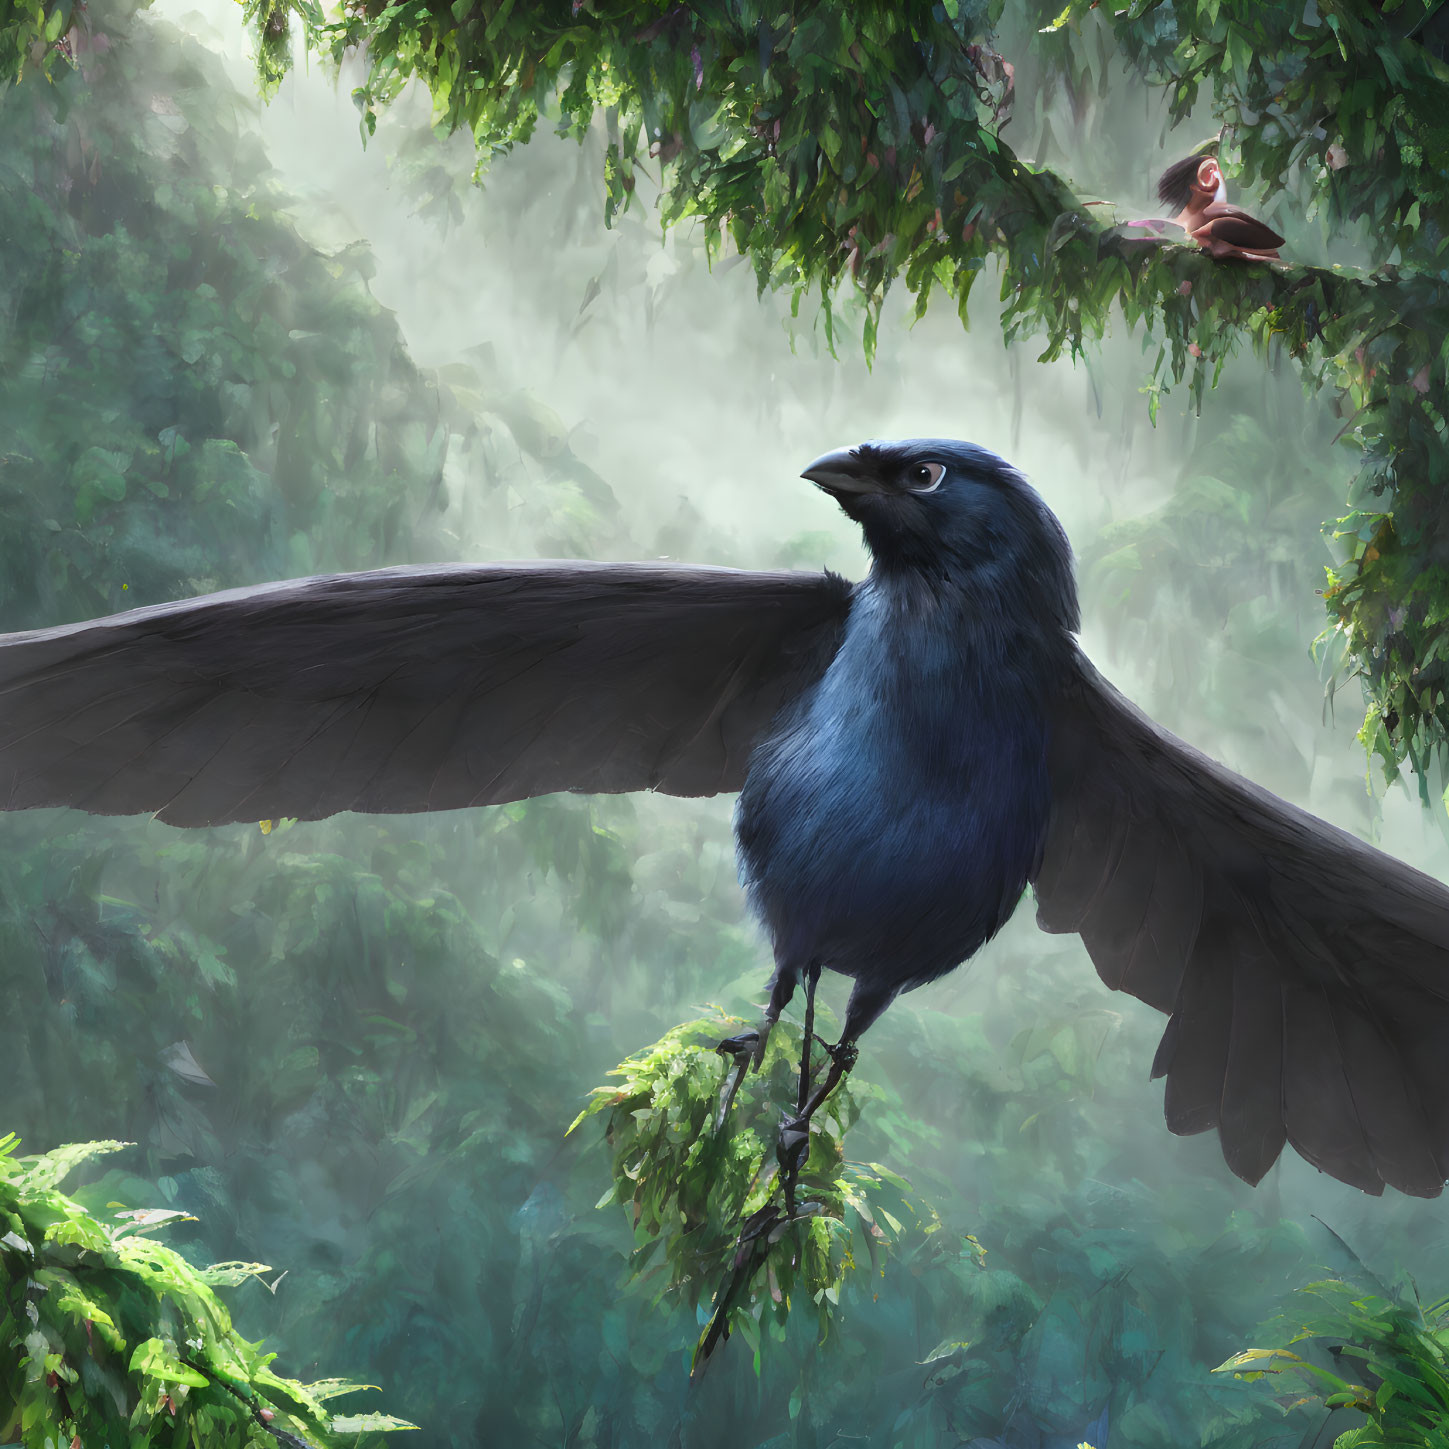 Blue crow perched on branch in misty forest with outstretched wings.